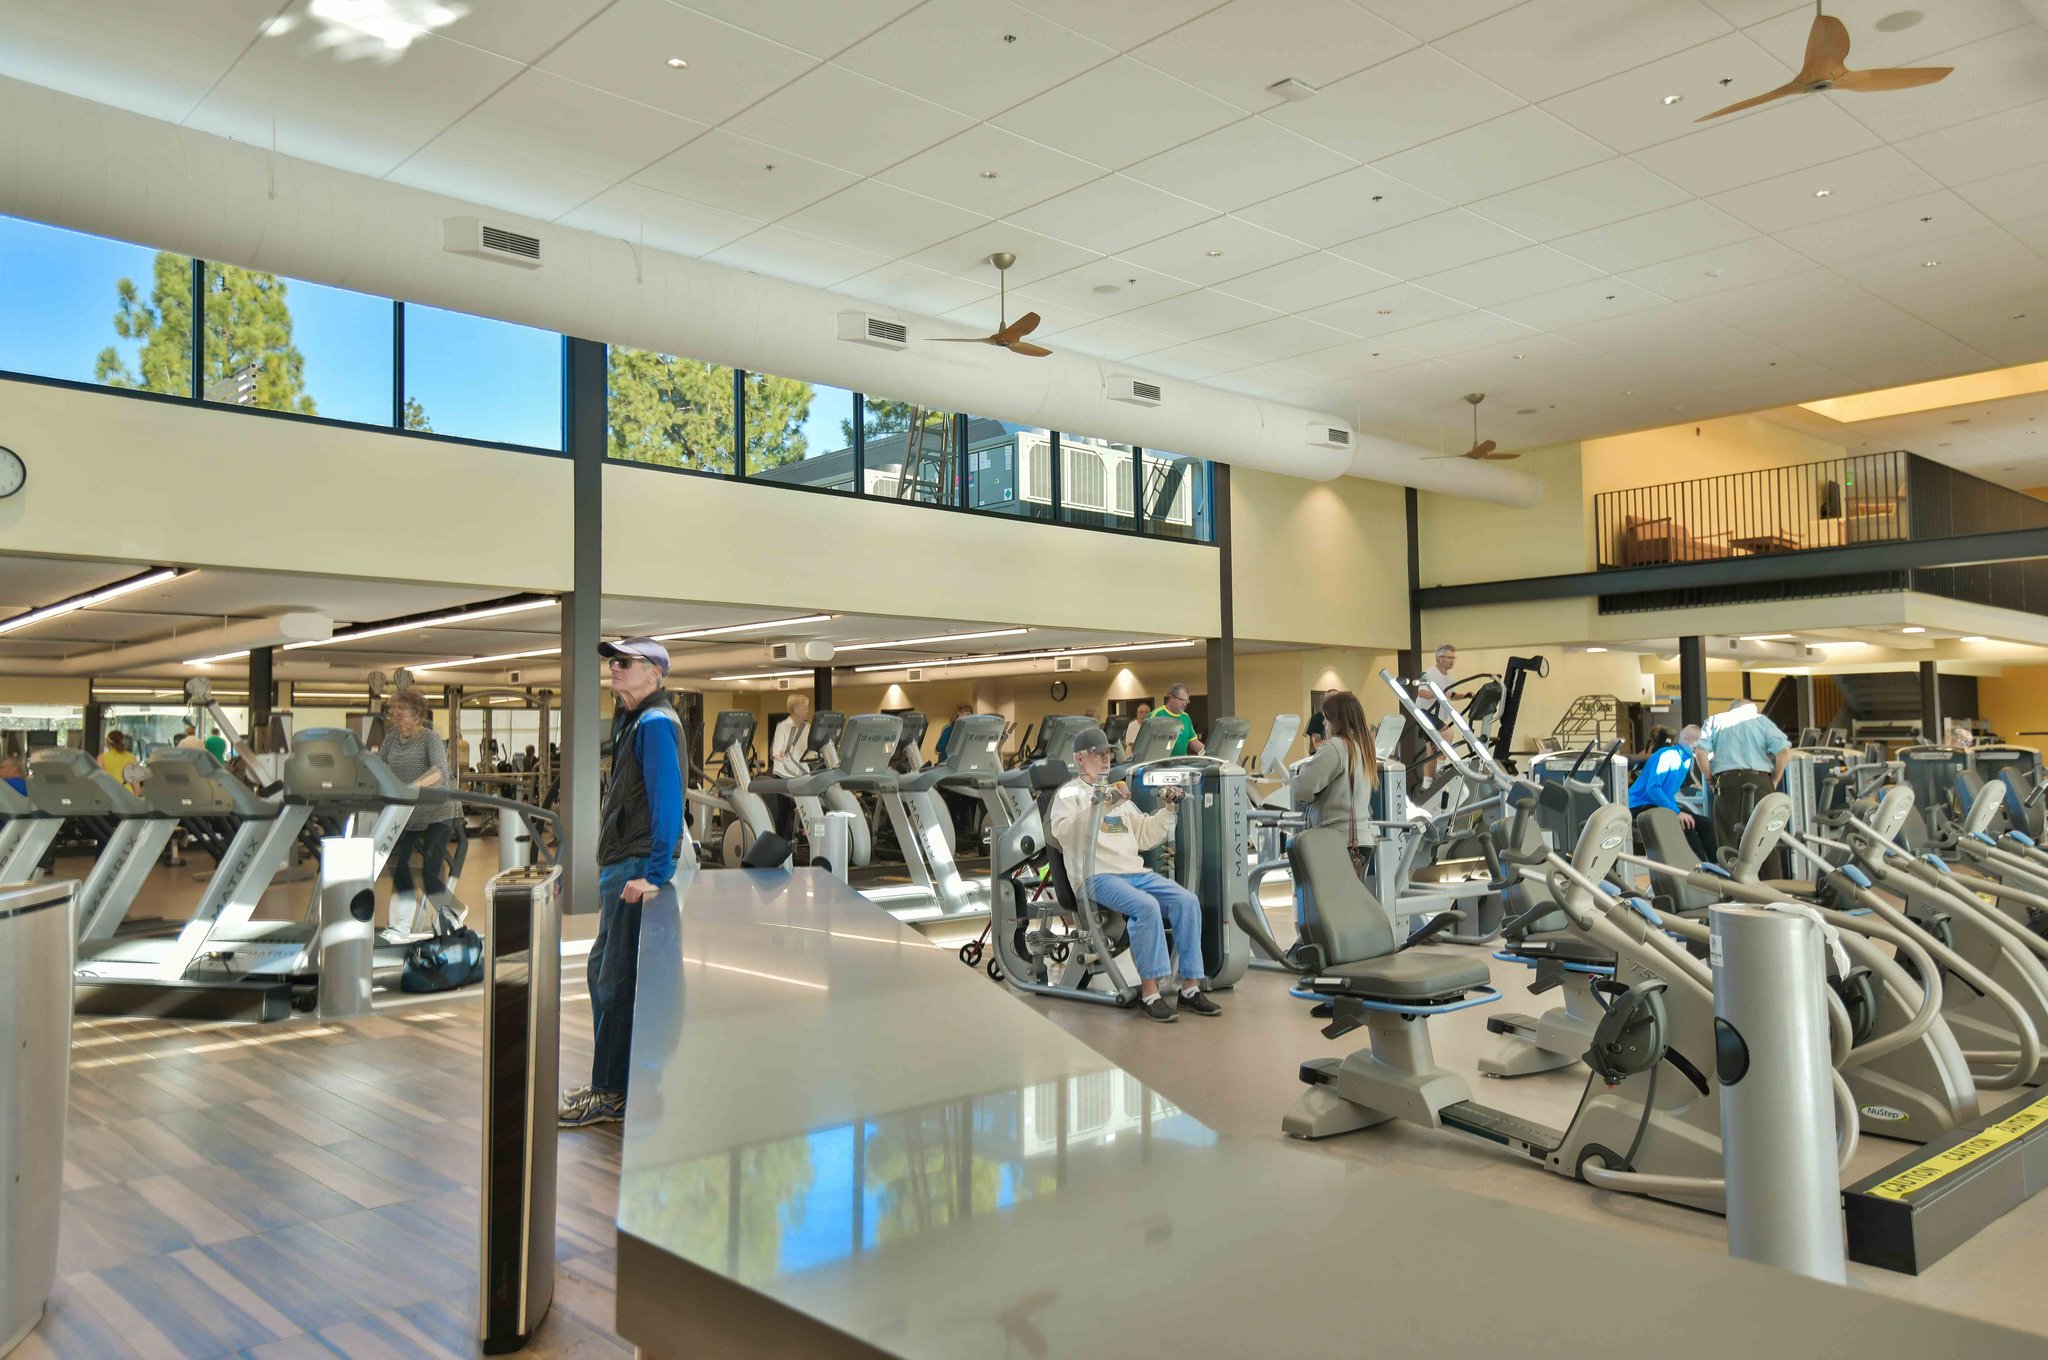 Gym at Fitness Center